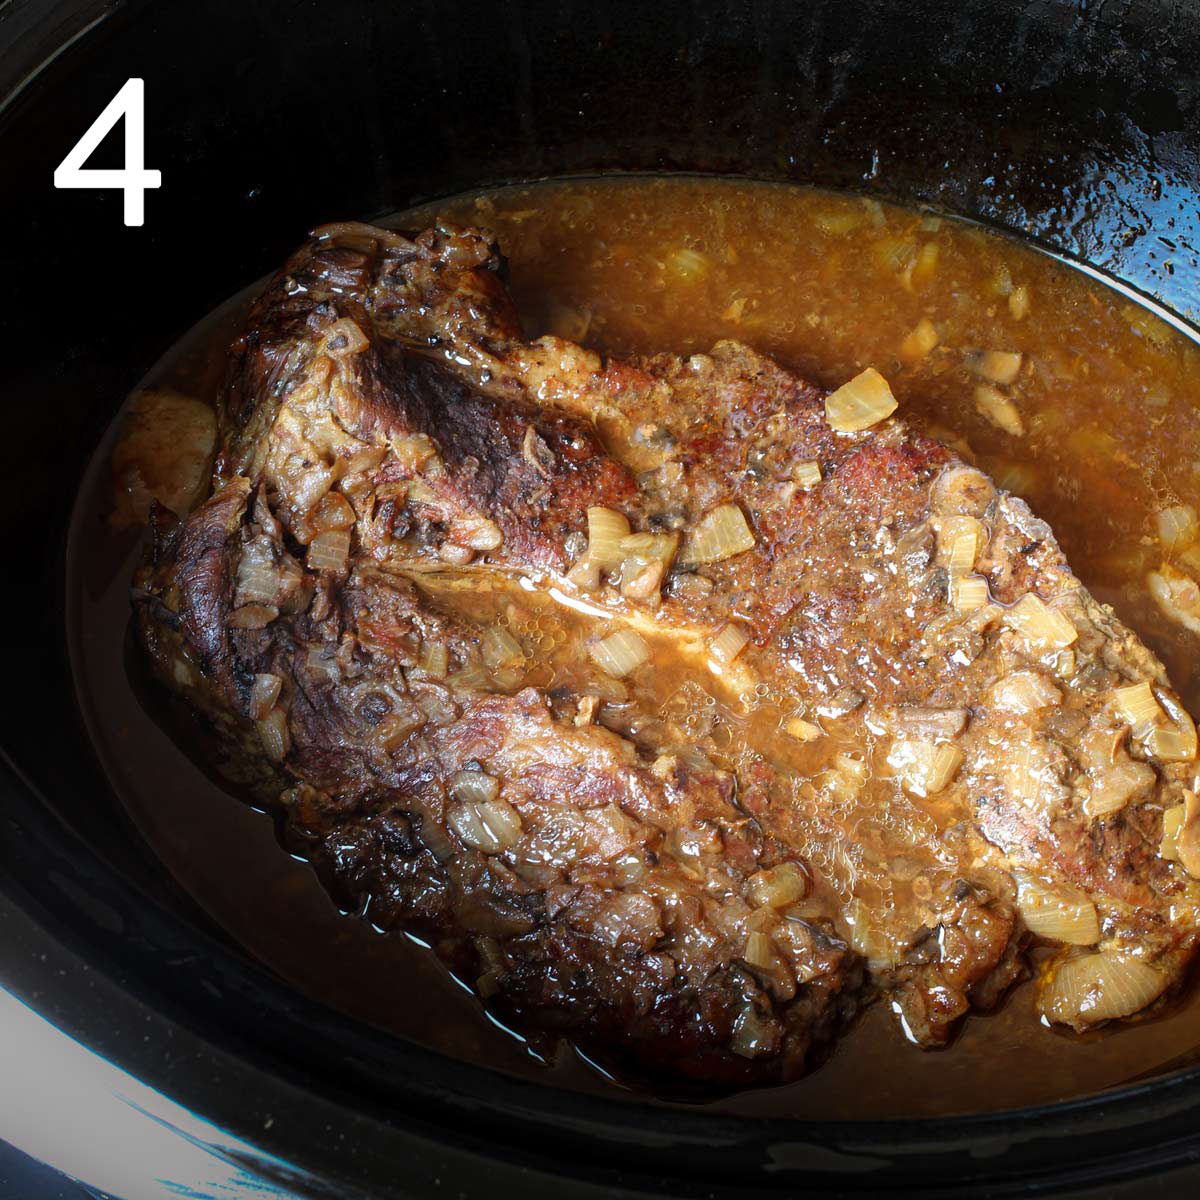 cooked and browned chuck roast in slow cooker with onions and juices.